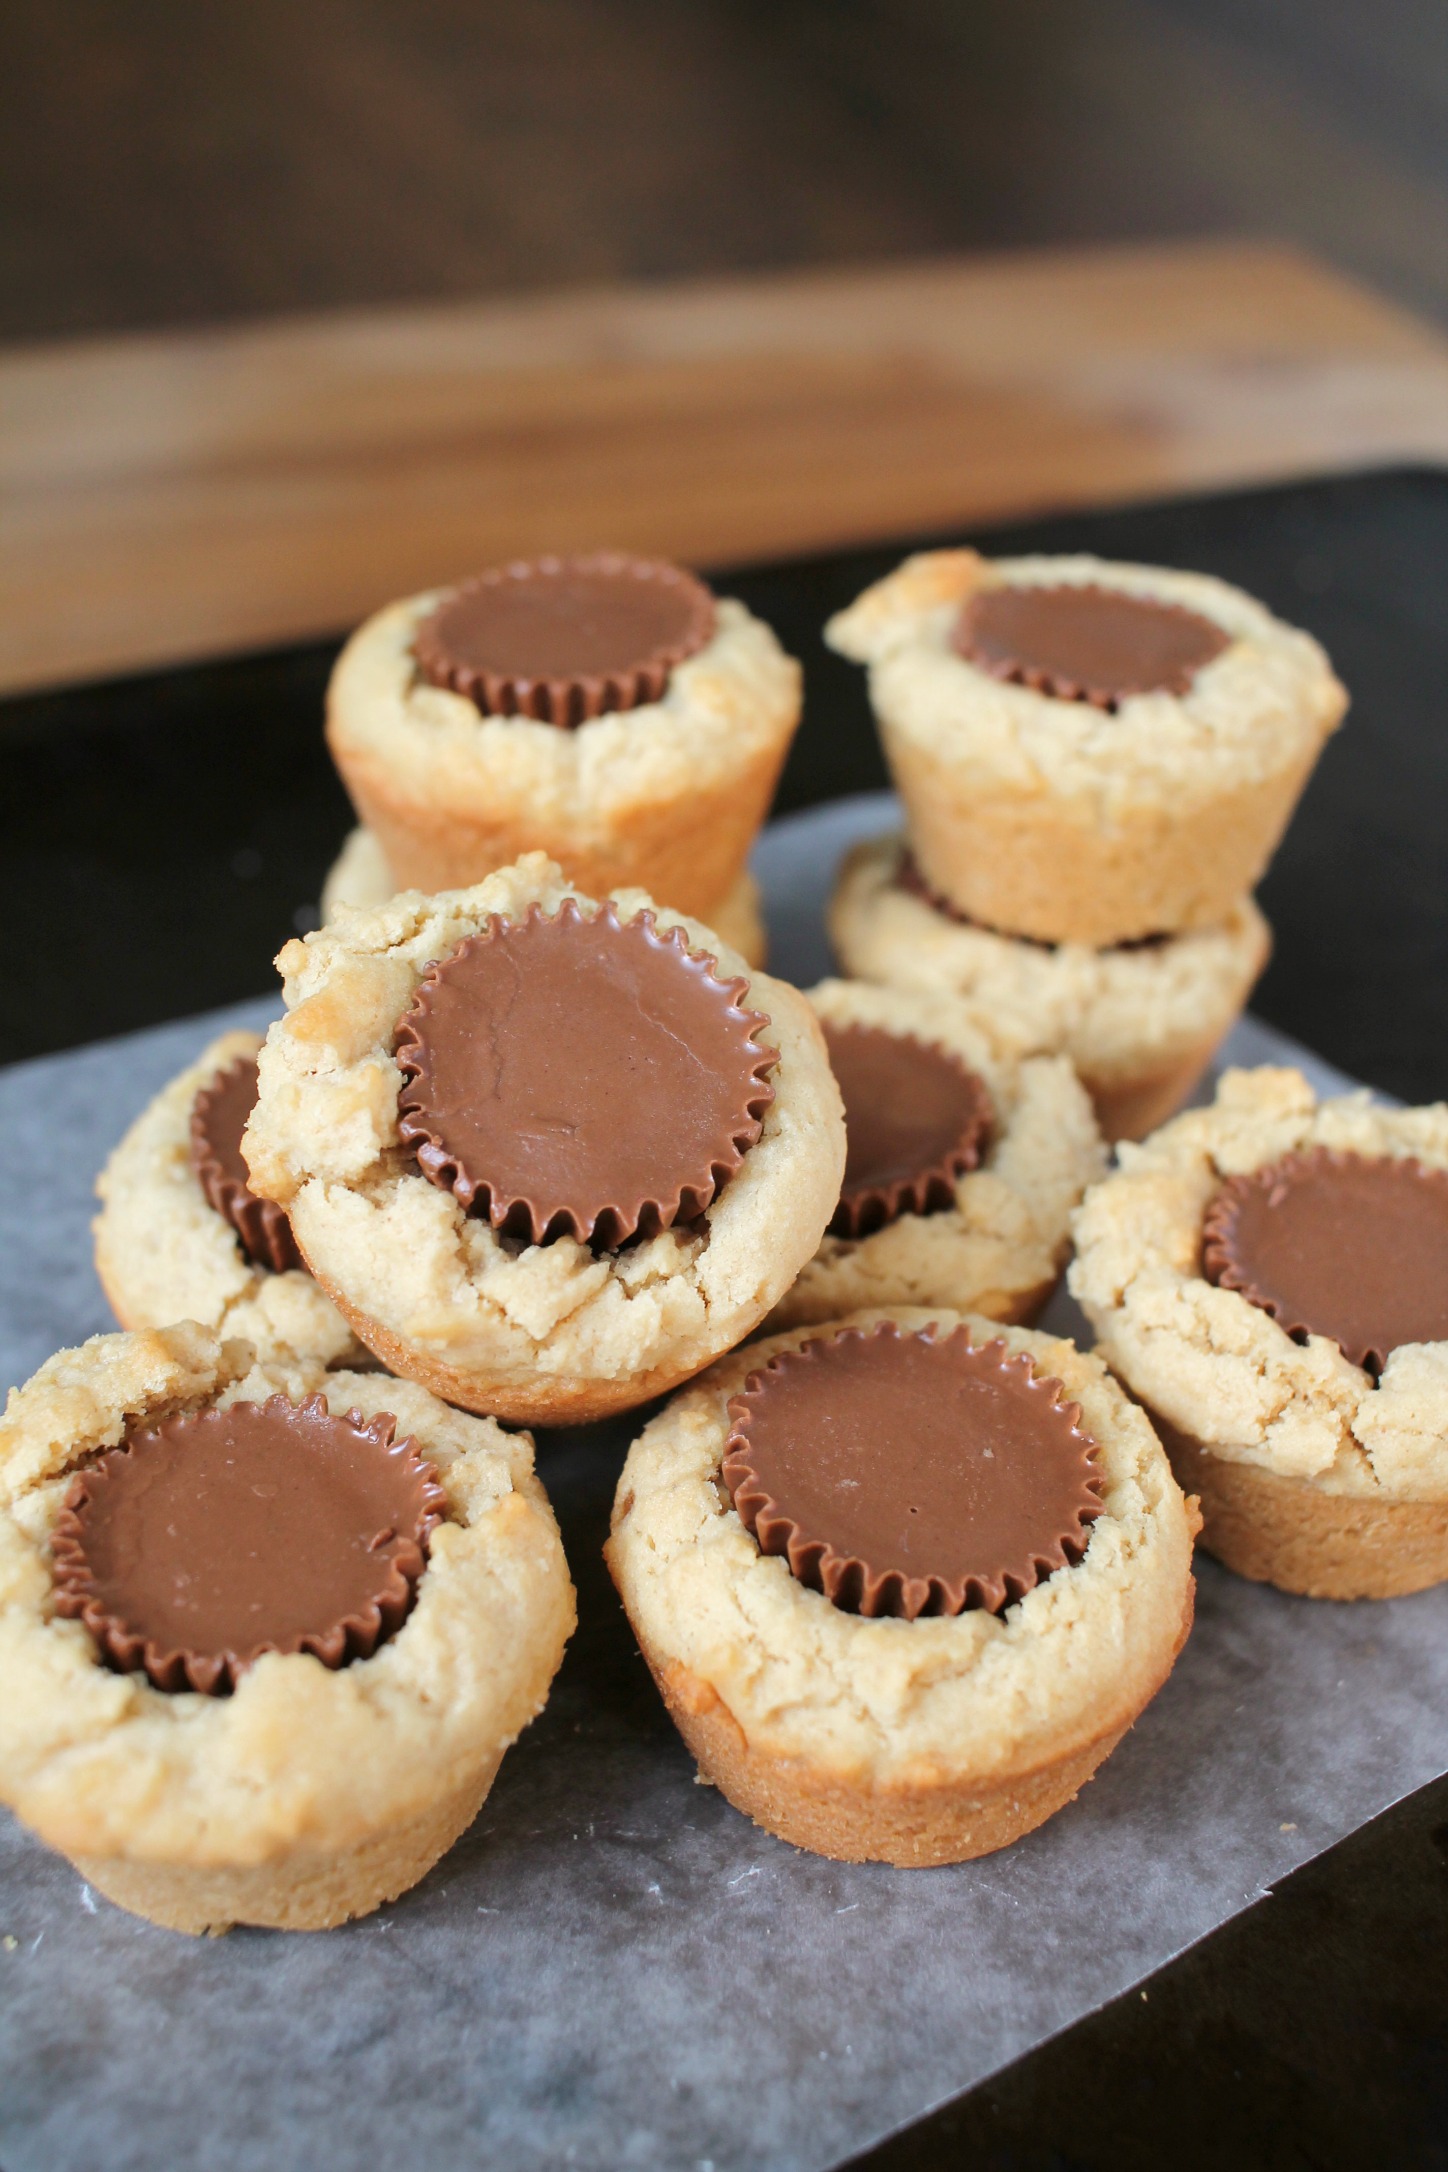 a pile of peanut butter cup cookies that look like mini peanut butter muffins with a Reese's in the middle